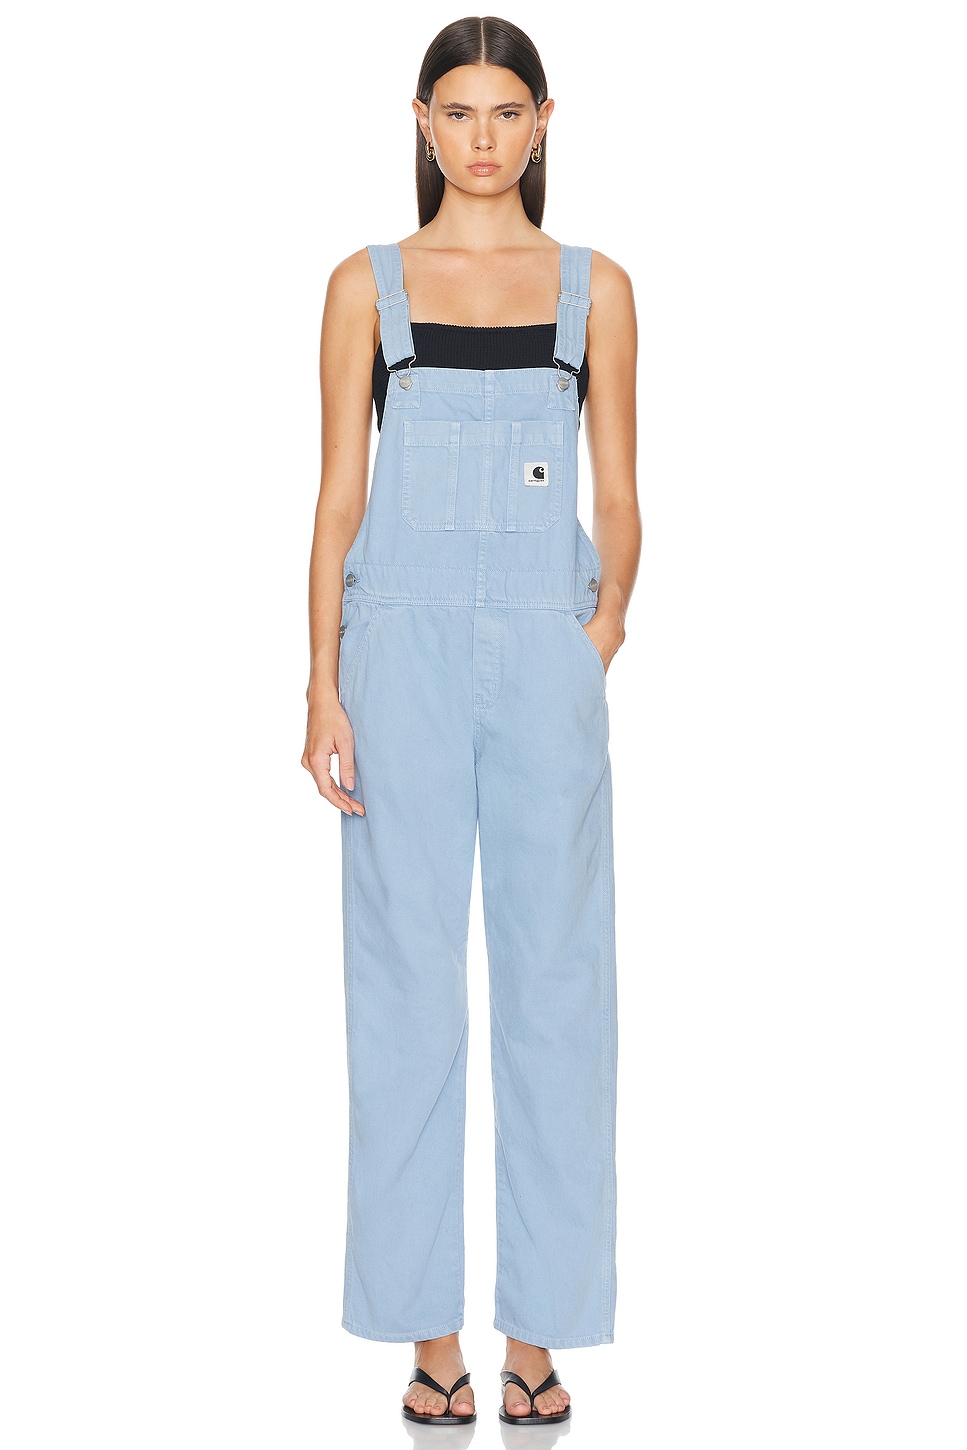 Image 1 of Carhartt WIP Garrison Bib Overall in Frosted Blue